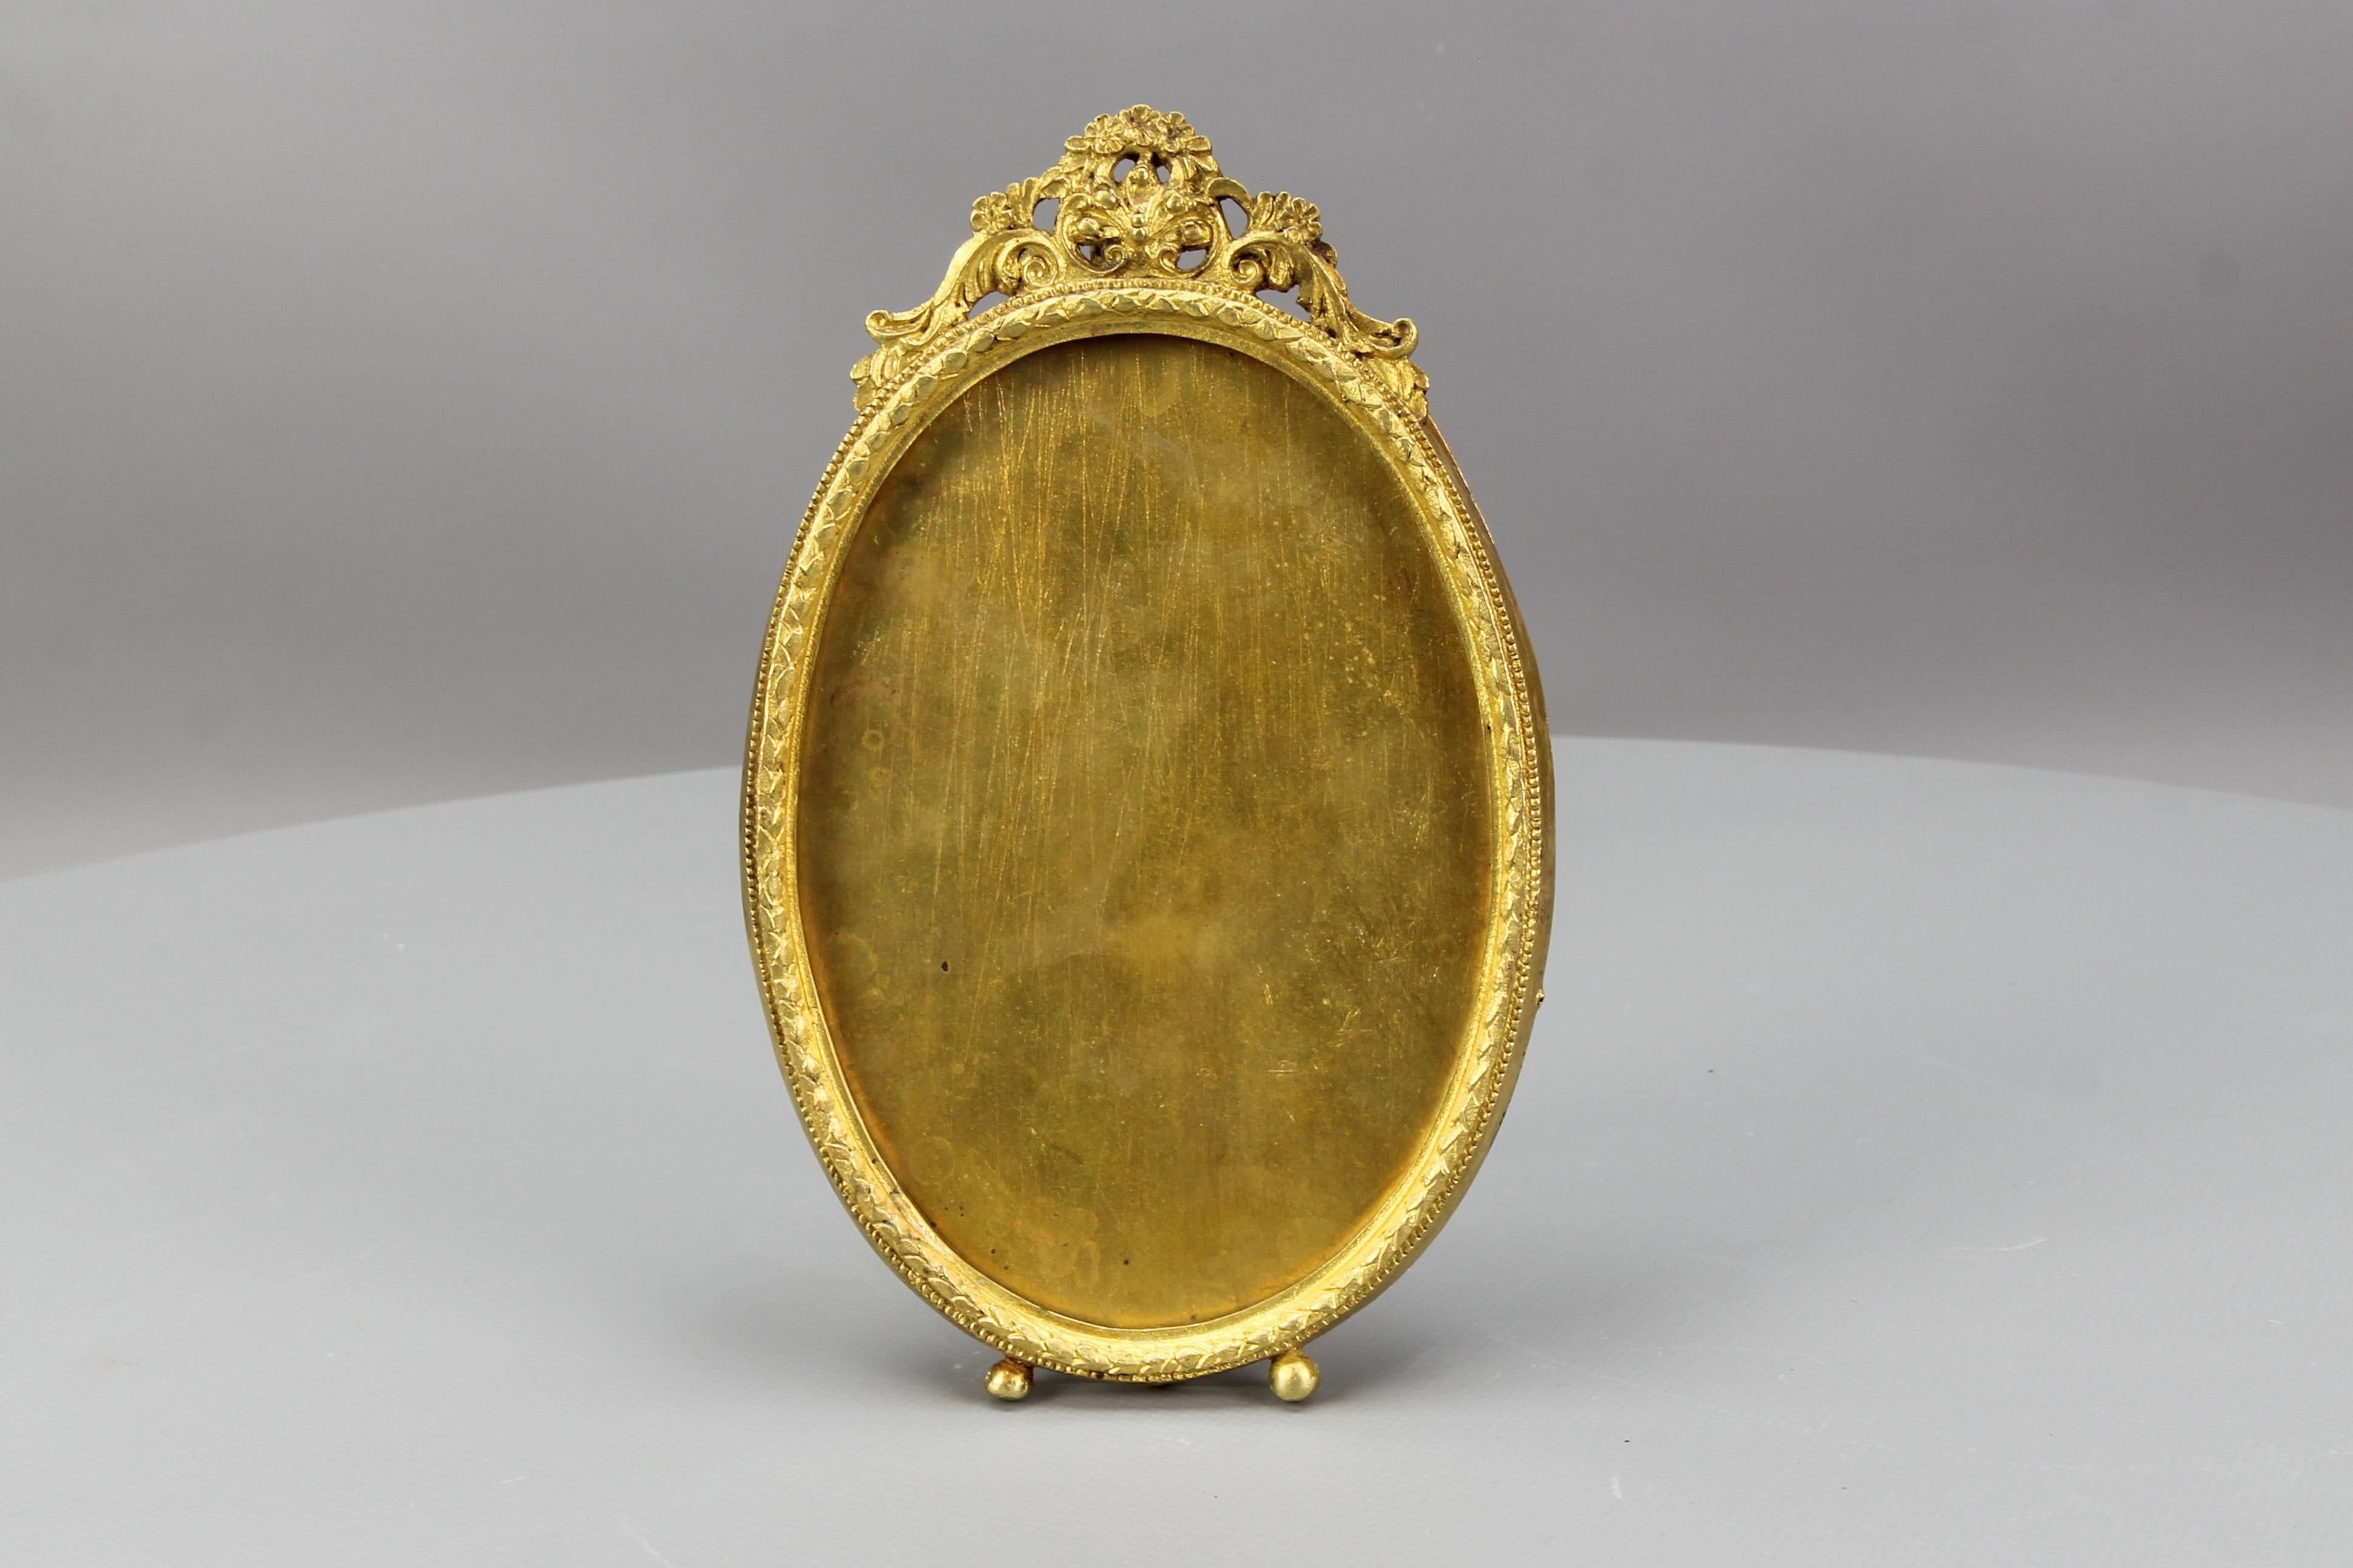 French Louis XVI style bronze oval photo or picture desktop easel frame from circa the 1900s.
This adorable picture frame is made of bronze and brass and has an easel supporting leg on the back. Decorated with flowers and leaf scrolls above the oval